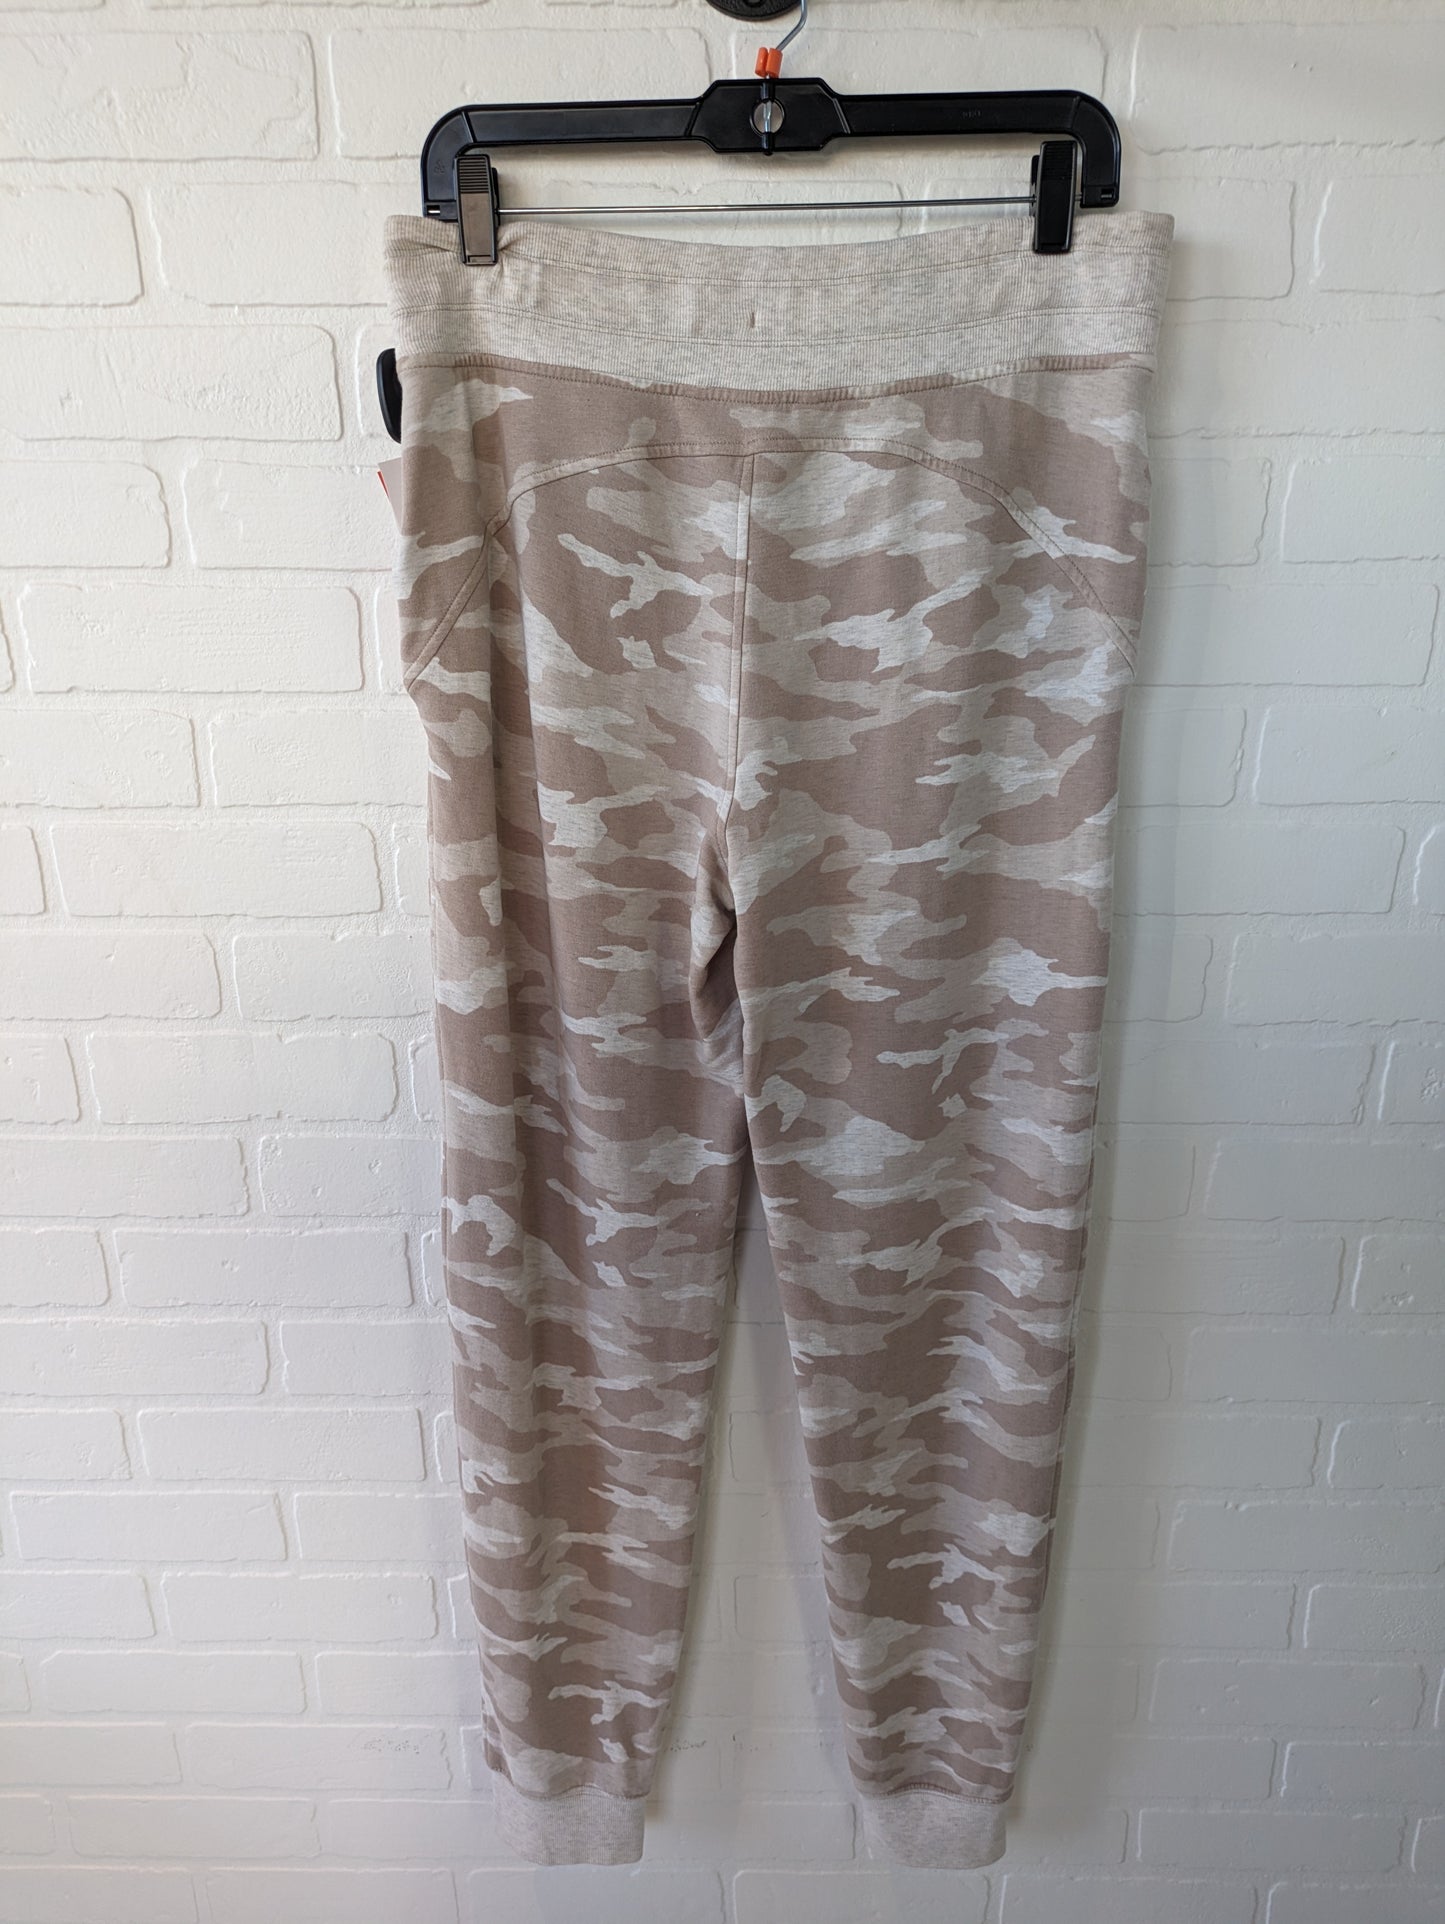 Athletic Pants By Athleta  Size: 8tall